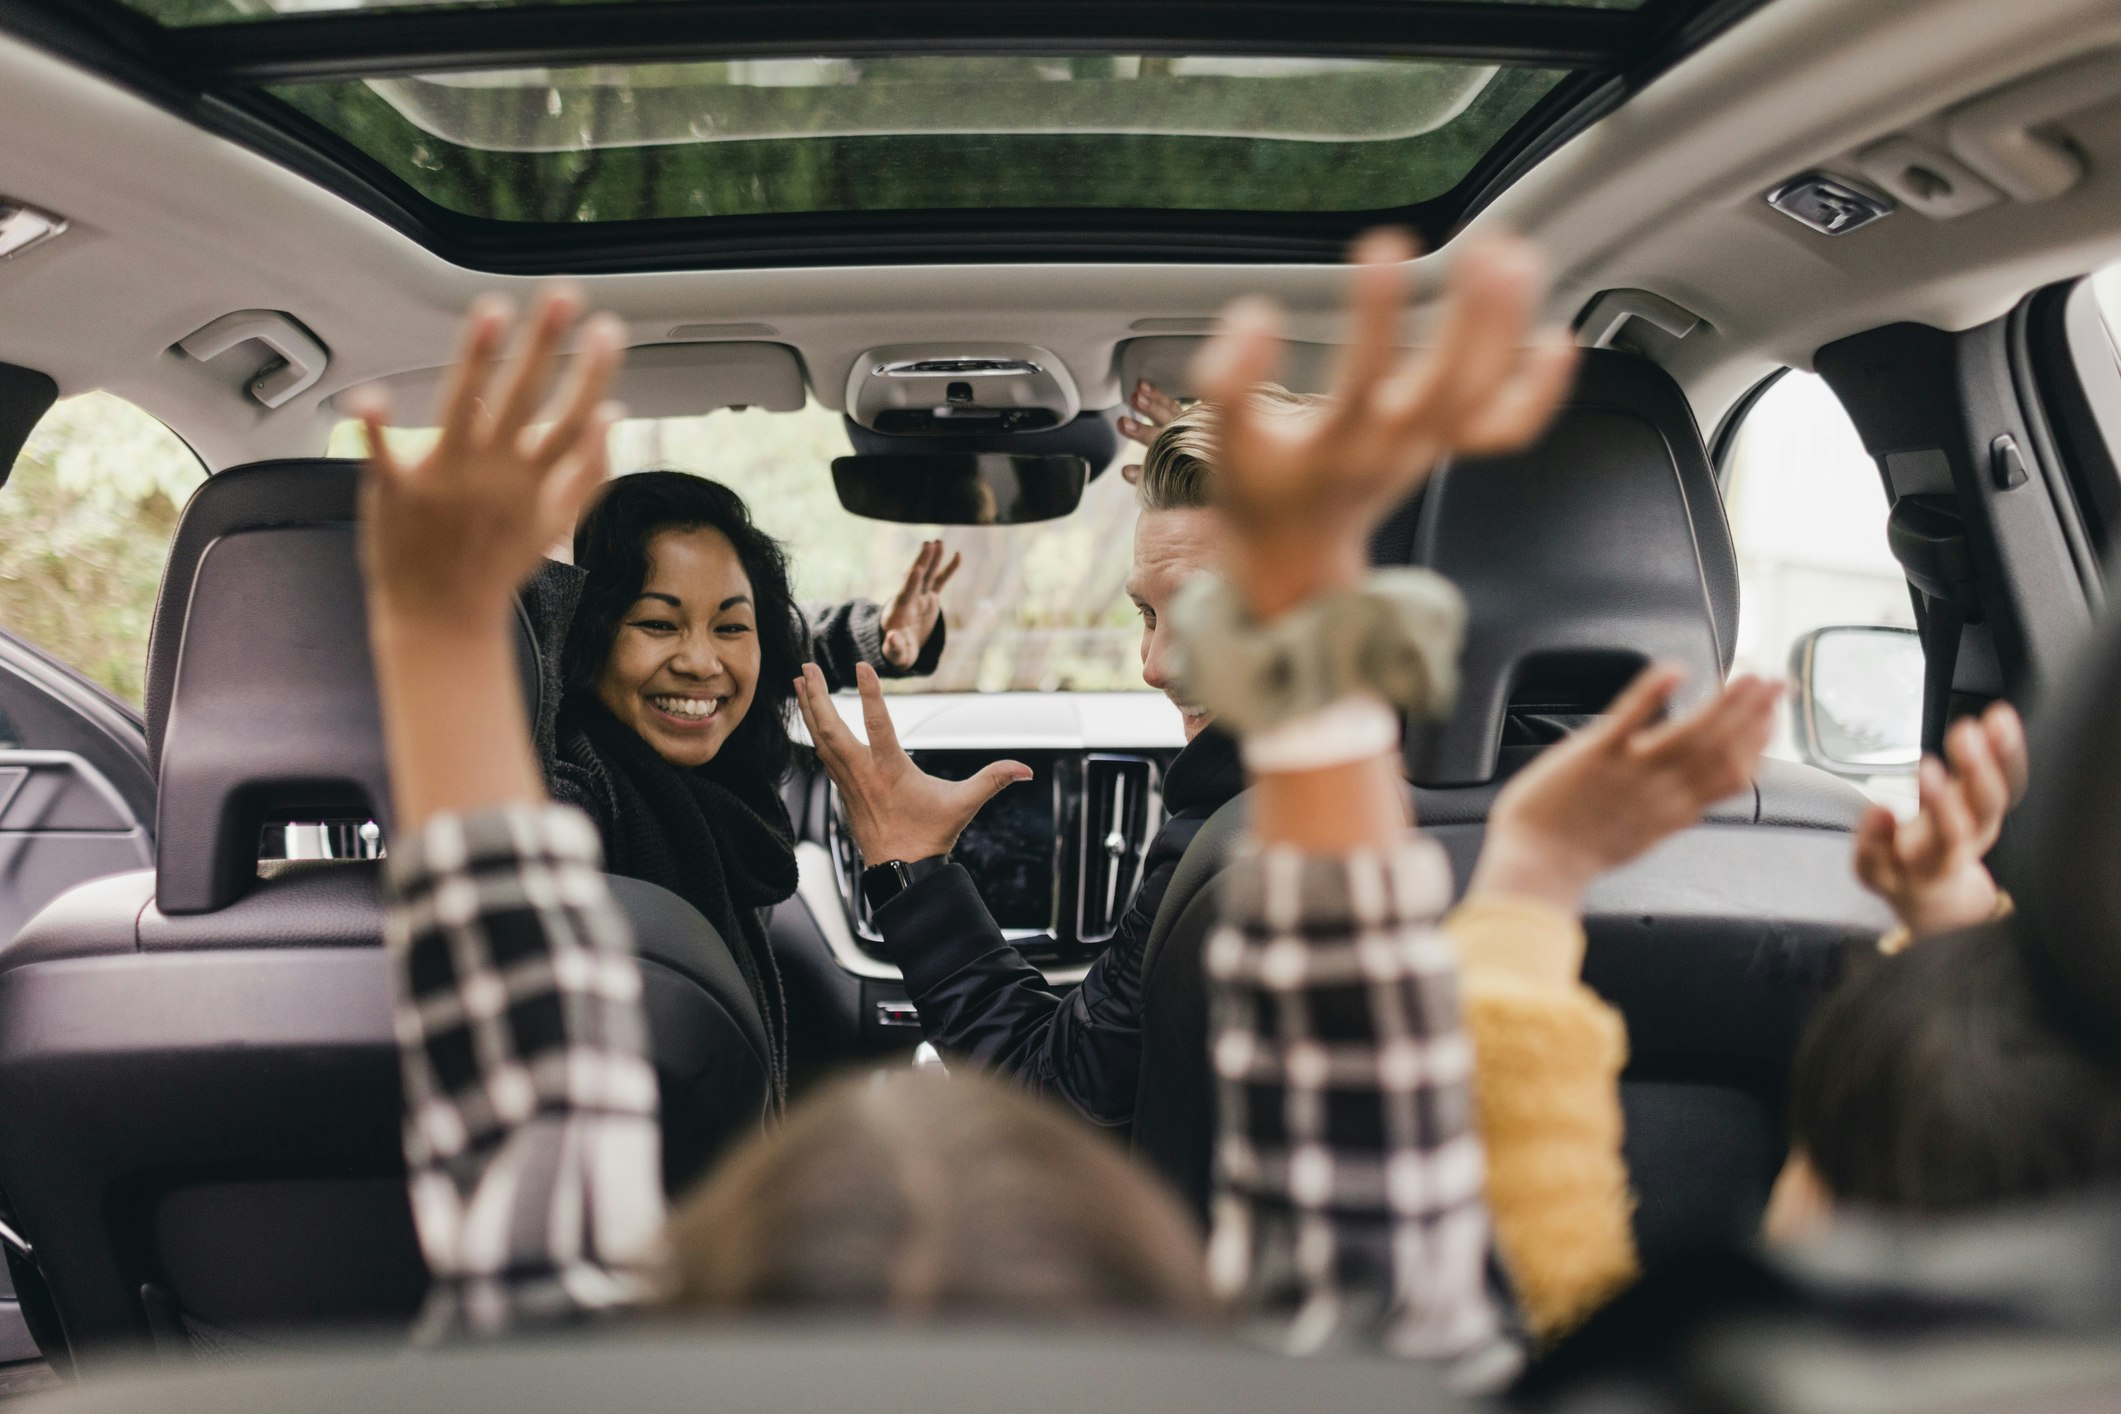 Hands up if you're excited to go on a road trip in Sweden!